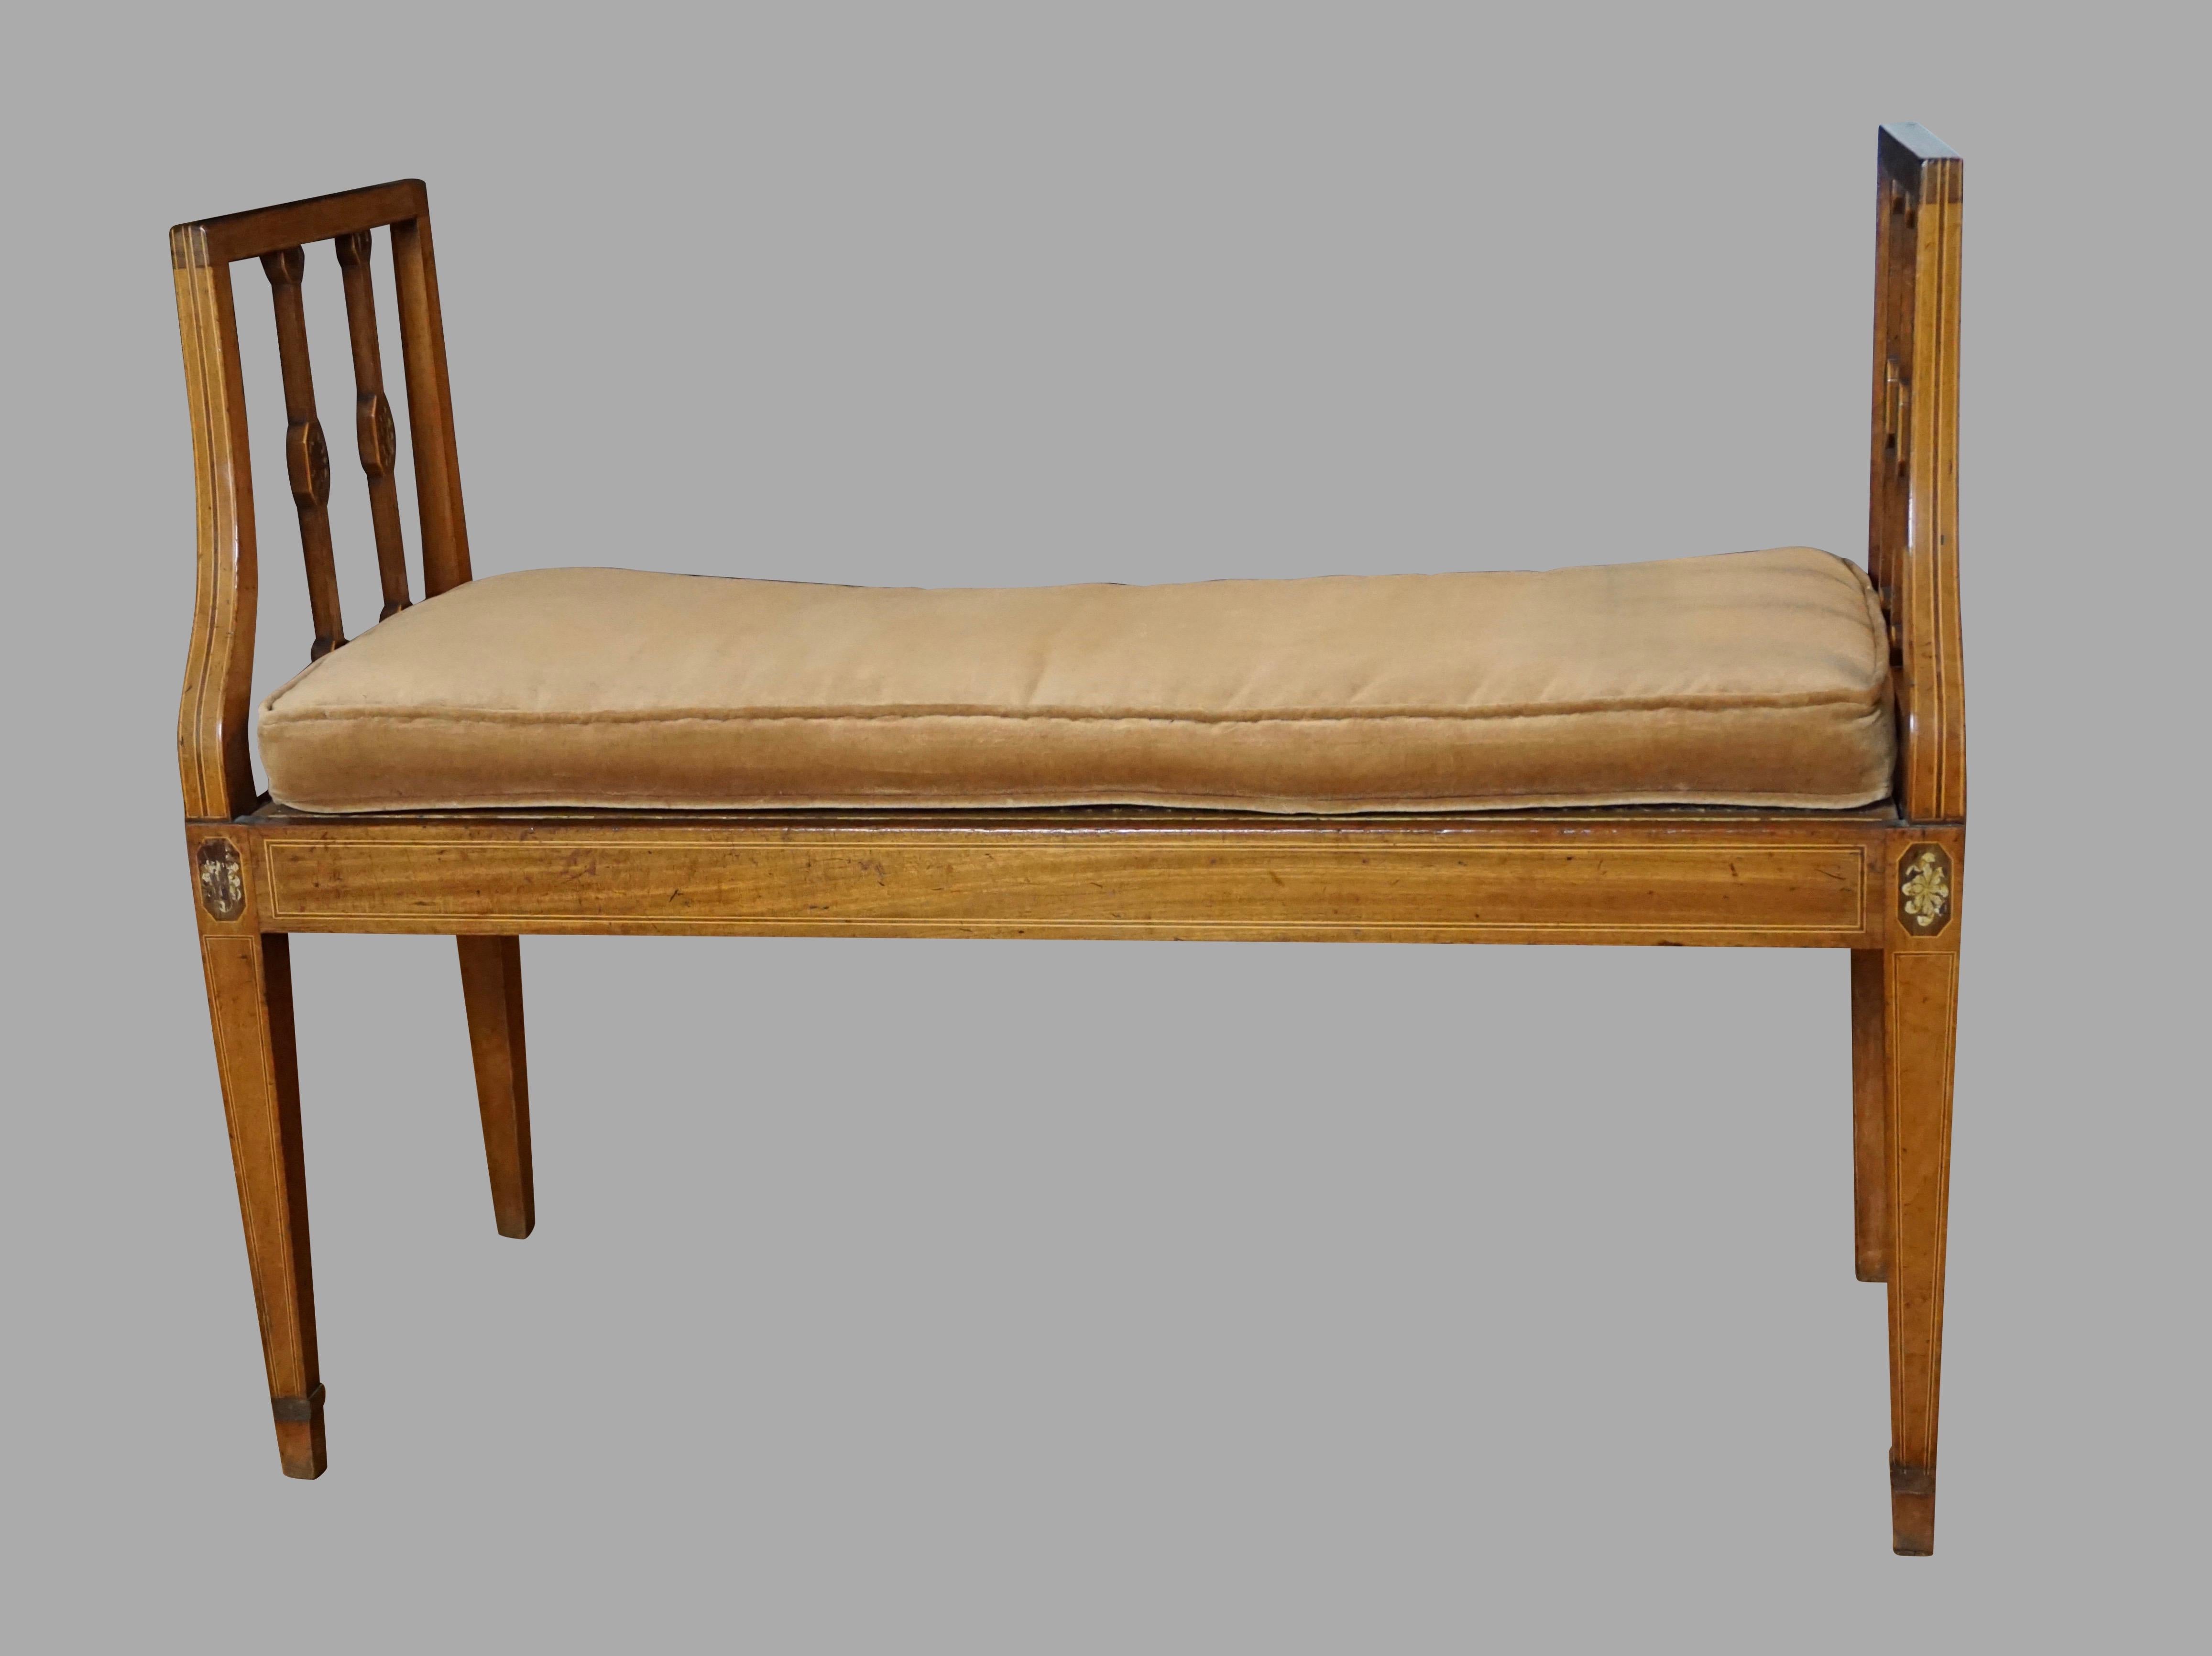 An elegant English mahogany line inlaid Hepplewhite period window seat with a caned deck, the square tapering legs headed with floral inlaid decoration, the side stiles similarly done. Comes with a later upholstered cushion. Circa 1790. Provenance: